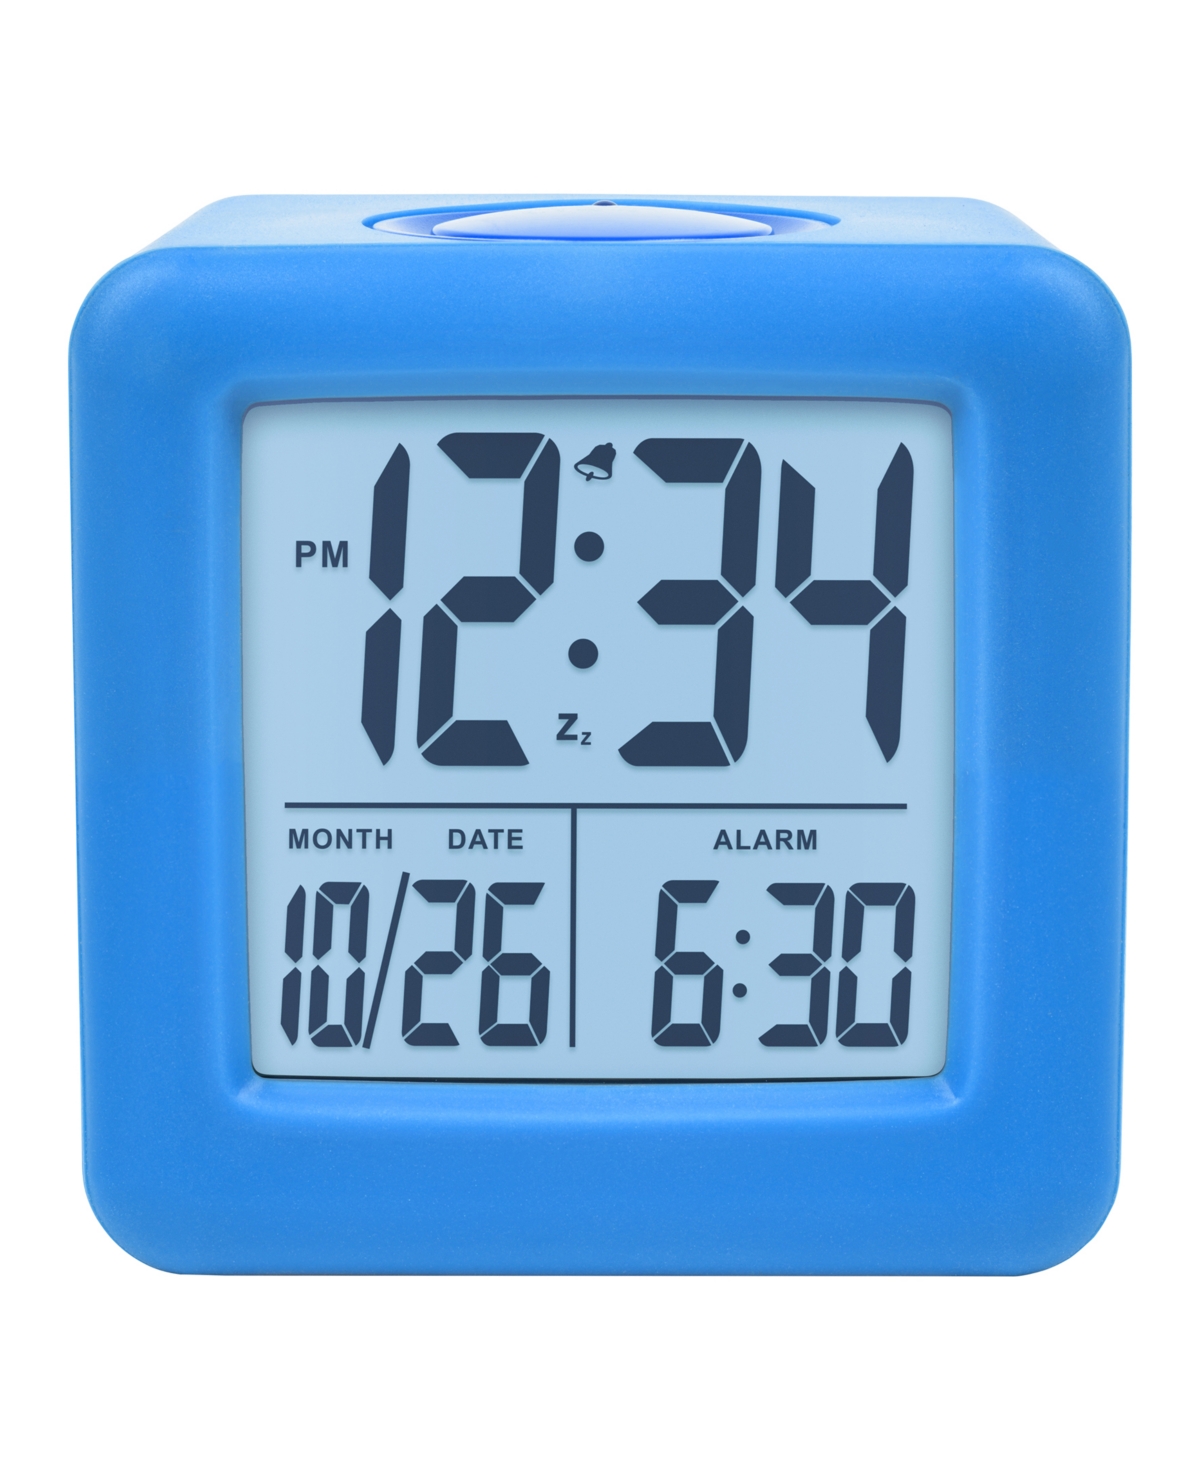 La Crosse Technology Equity 73005 Soft Cube Lcd Alarm Clock With Smart Light In Blue